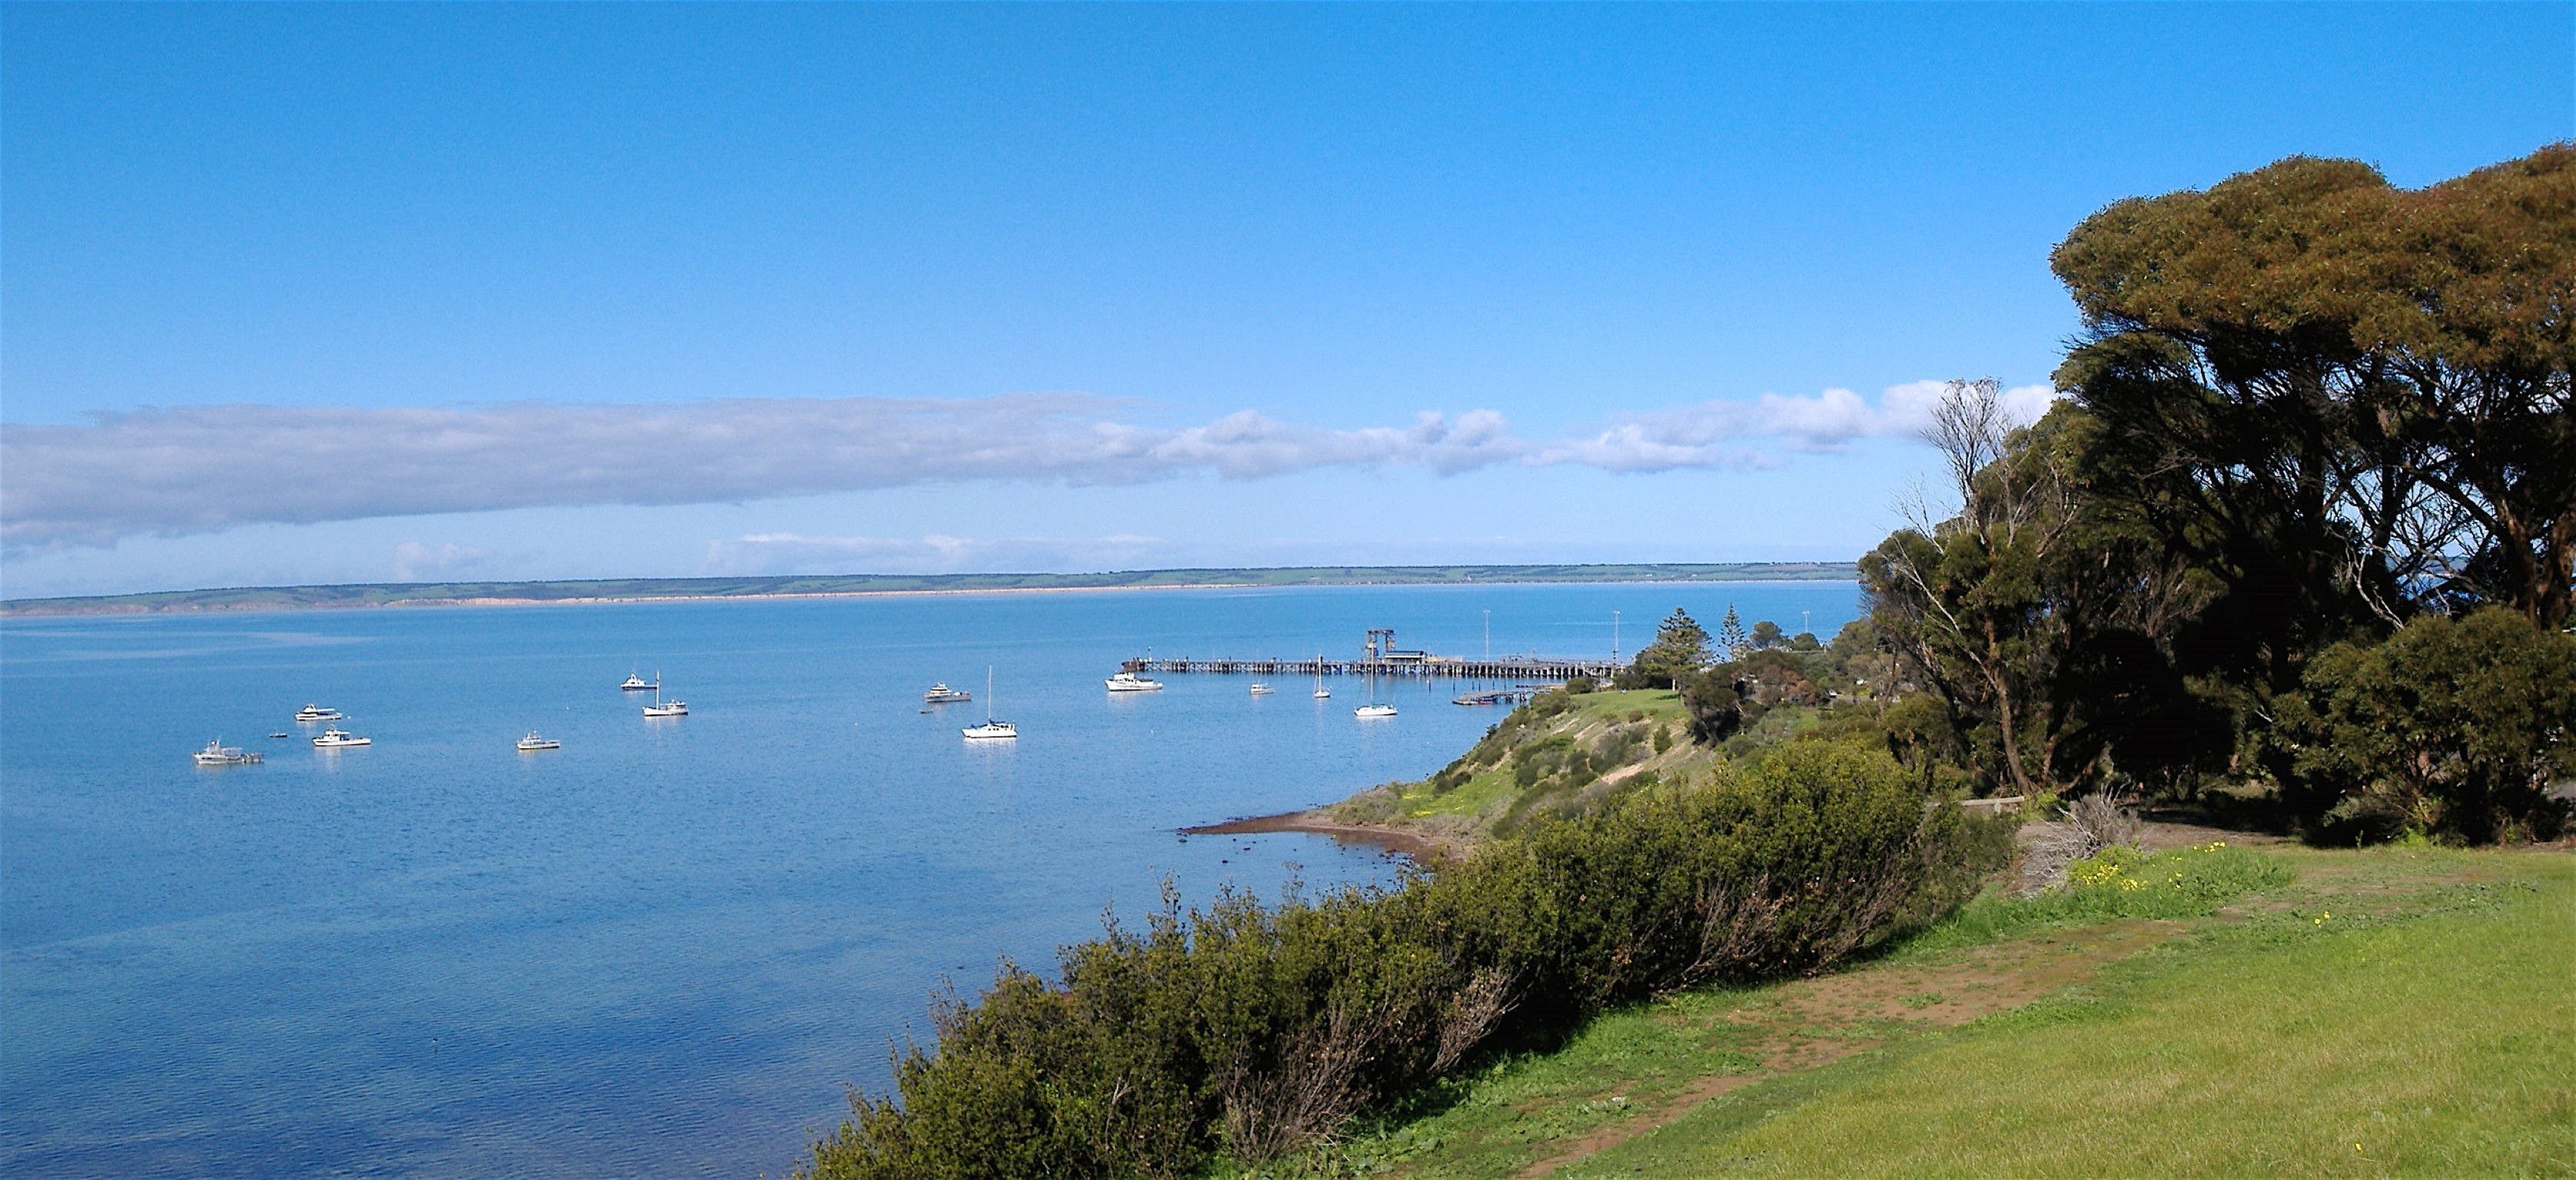 Nepean Bay Beach - Attractions